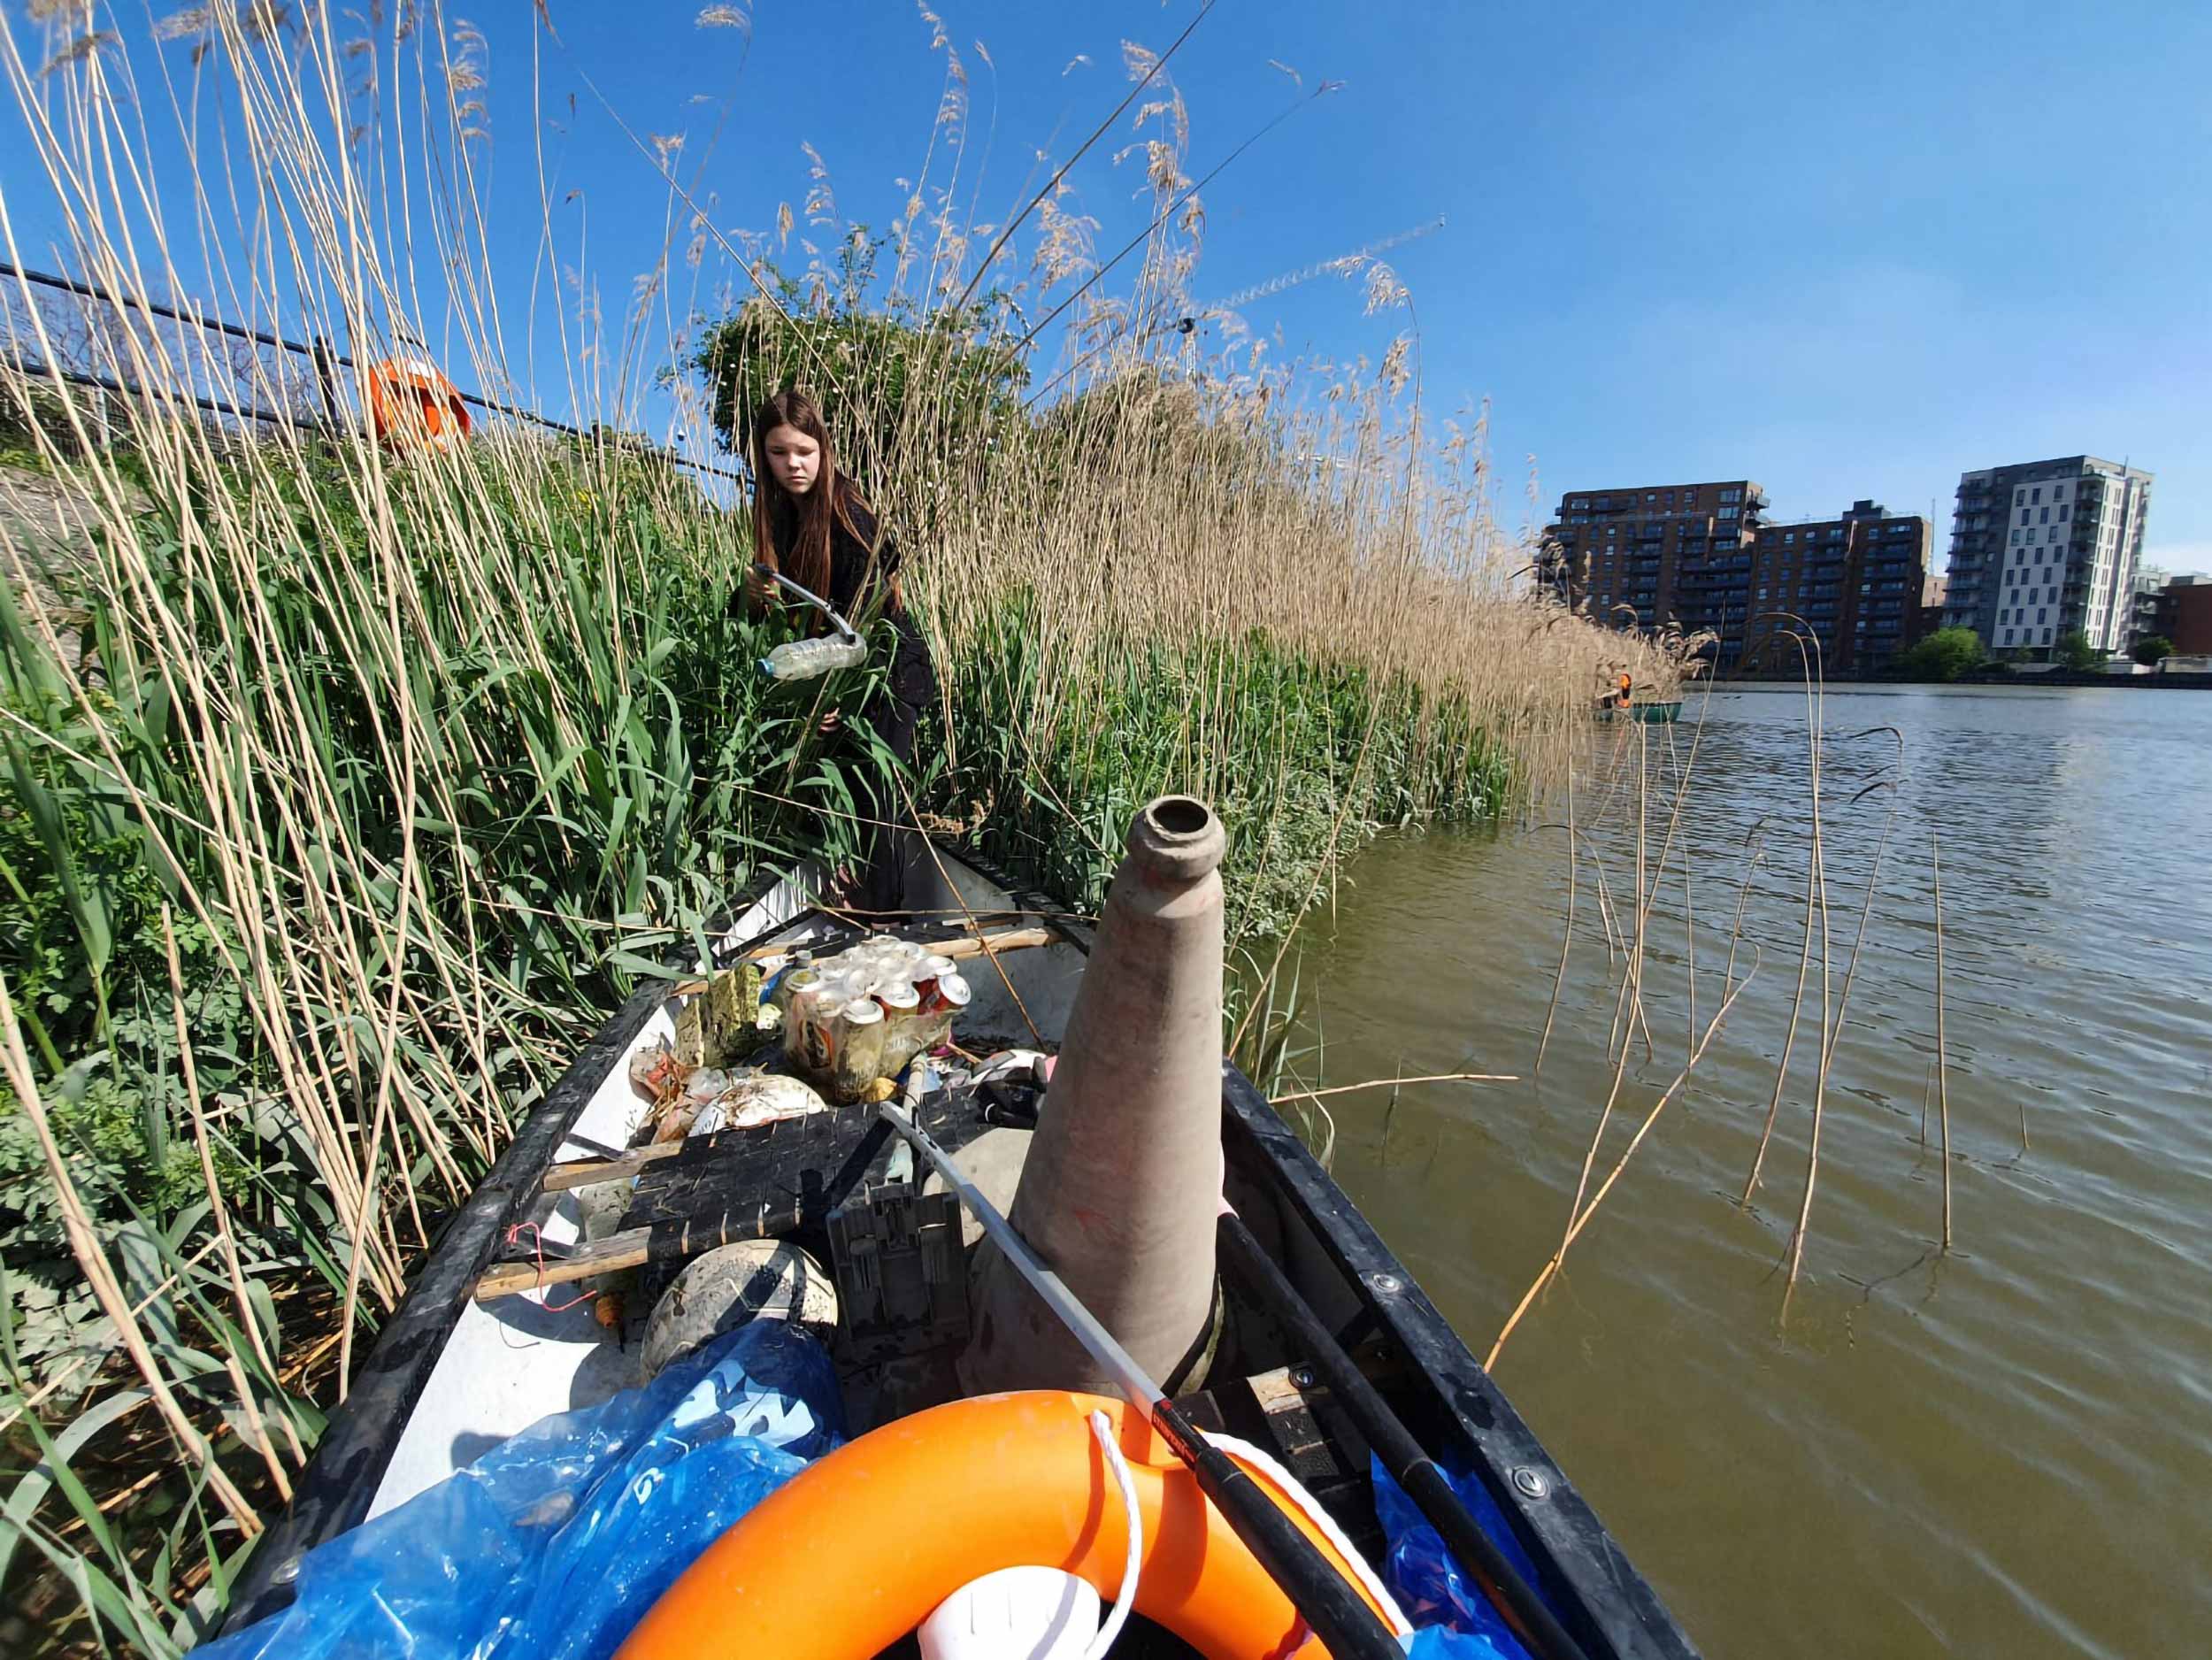 Picking litter out of a bank of reeds